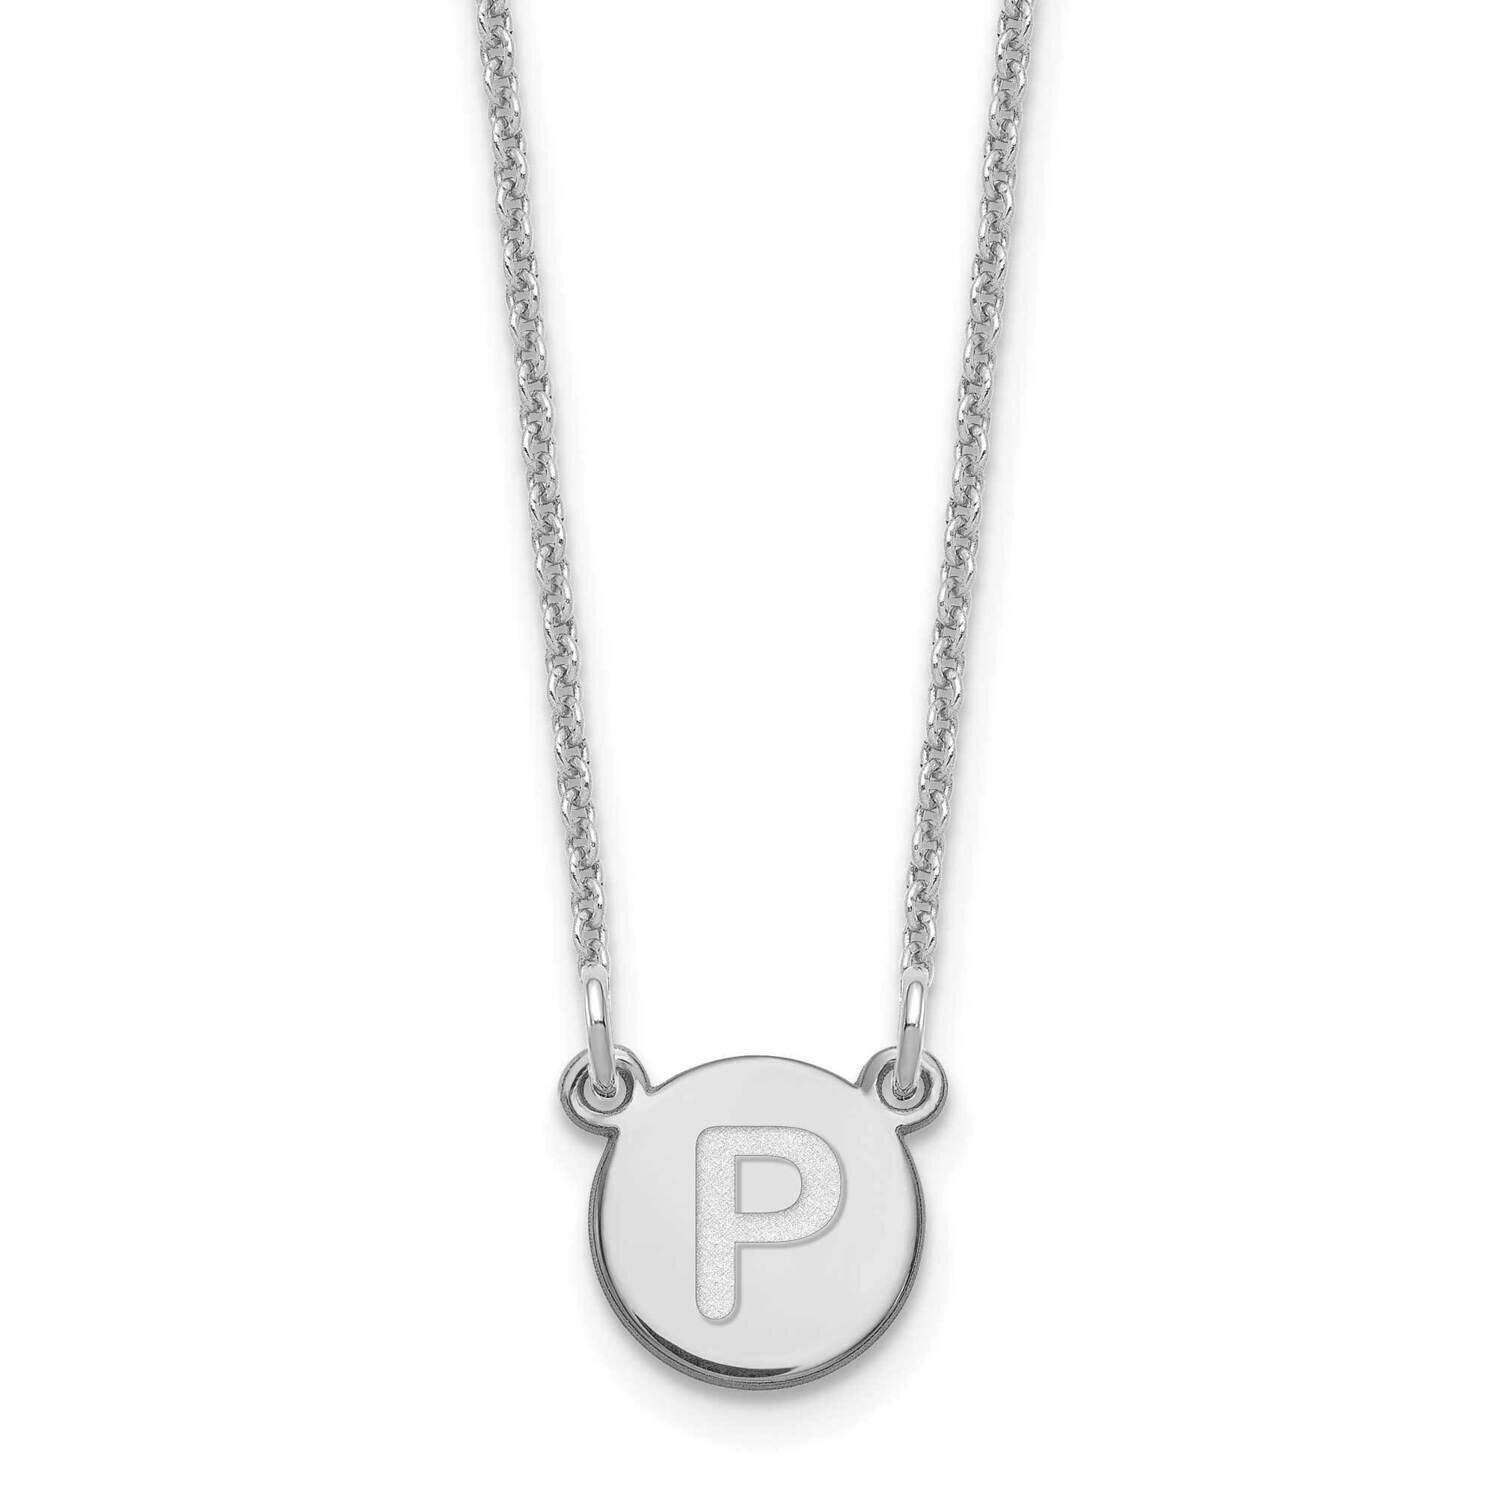 Tiny Circle Block Initial Letter P Necklace 14k White Gold XNA722W/P